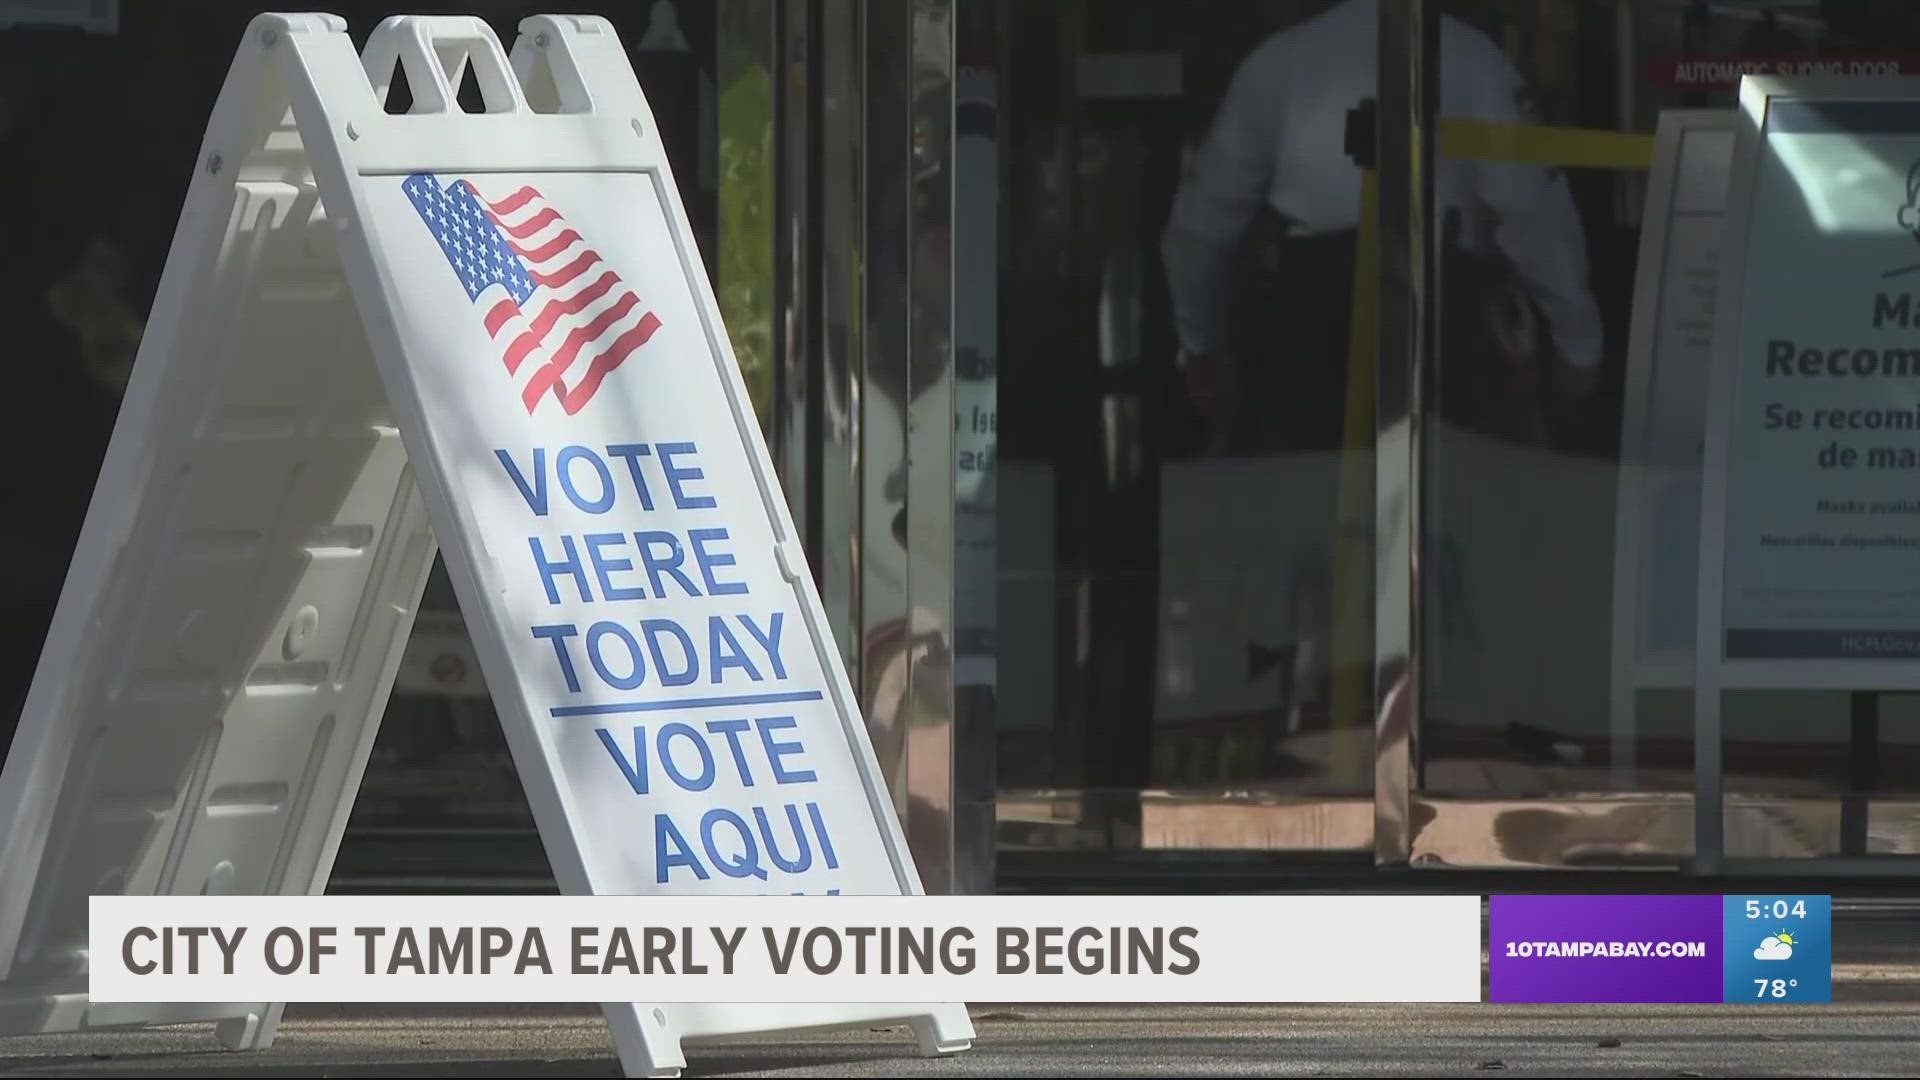 Early voting kicks off Monday in Tampa.